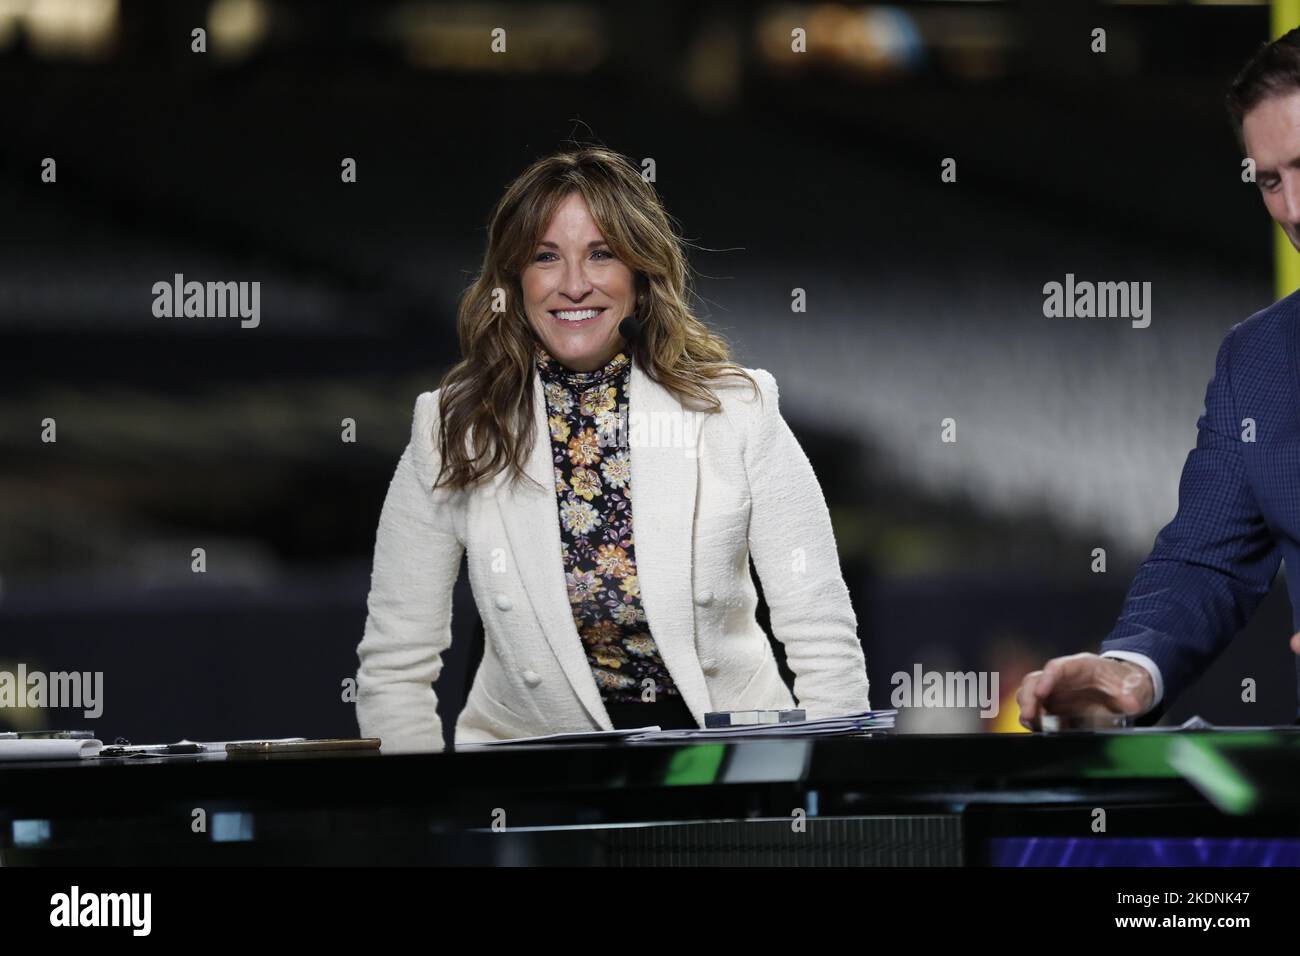 New Orleans, USA. 07th Nov, 2022. ESPN Monday Night Football analyst Suzy  Kolber chats with a colleague during a National Football League game at  Caesars Superdome in New Orleans, Louisiana on Monday,